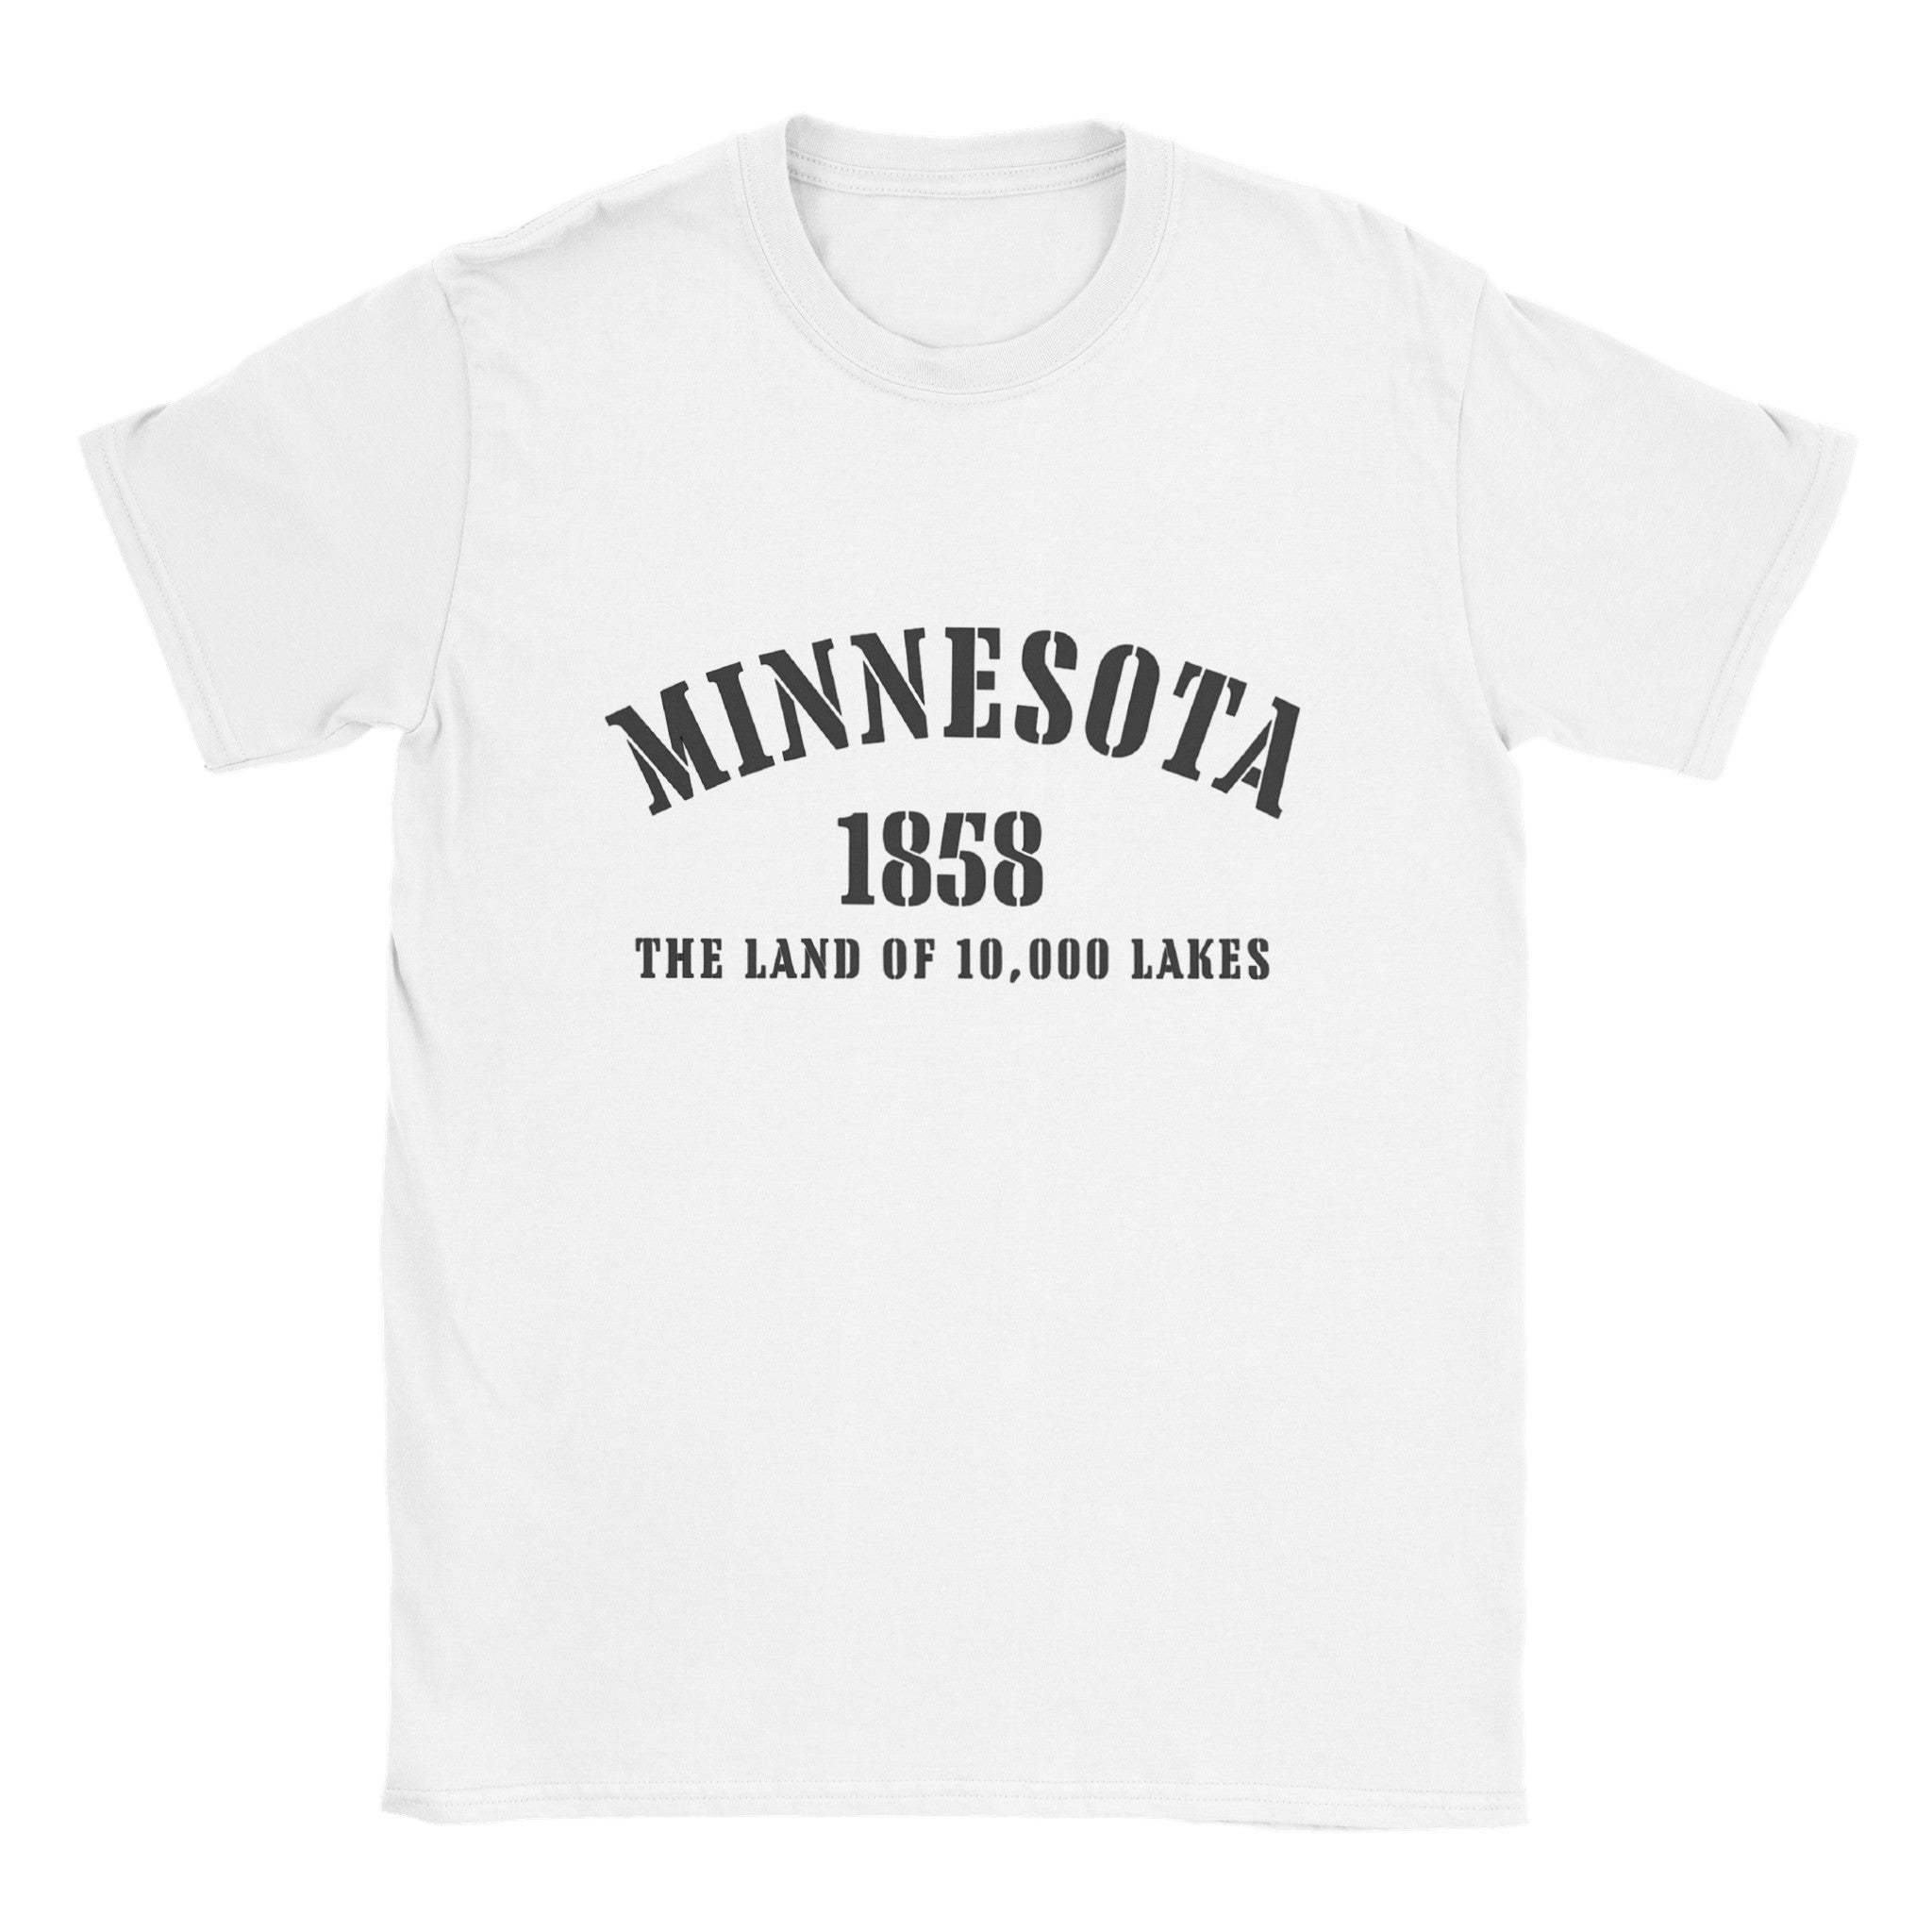 Minnesota- Classic Unisex Crewneck States T-shirt - Creations by Chris and Carlos